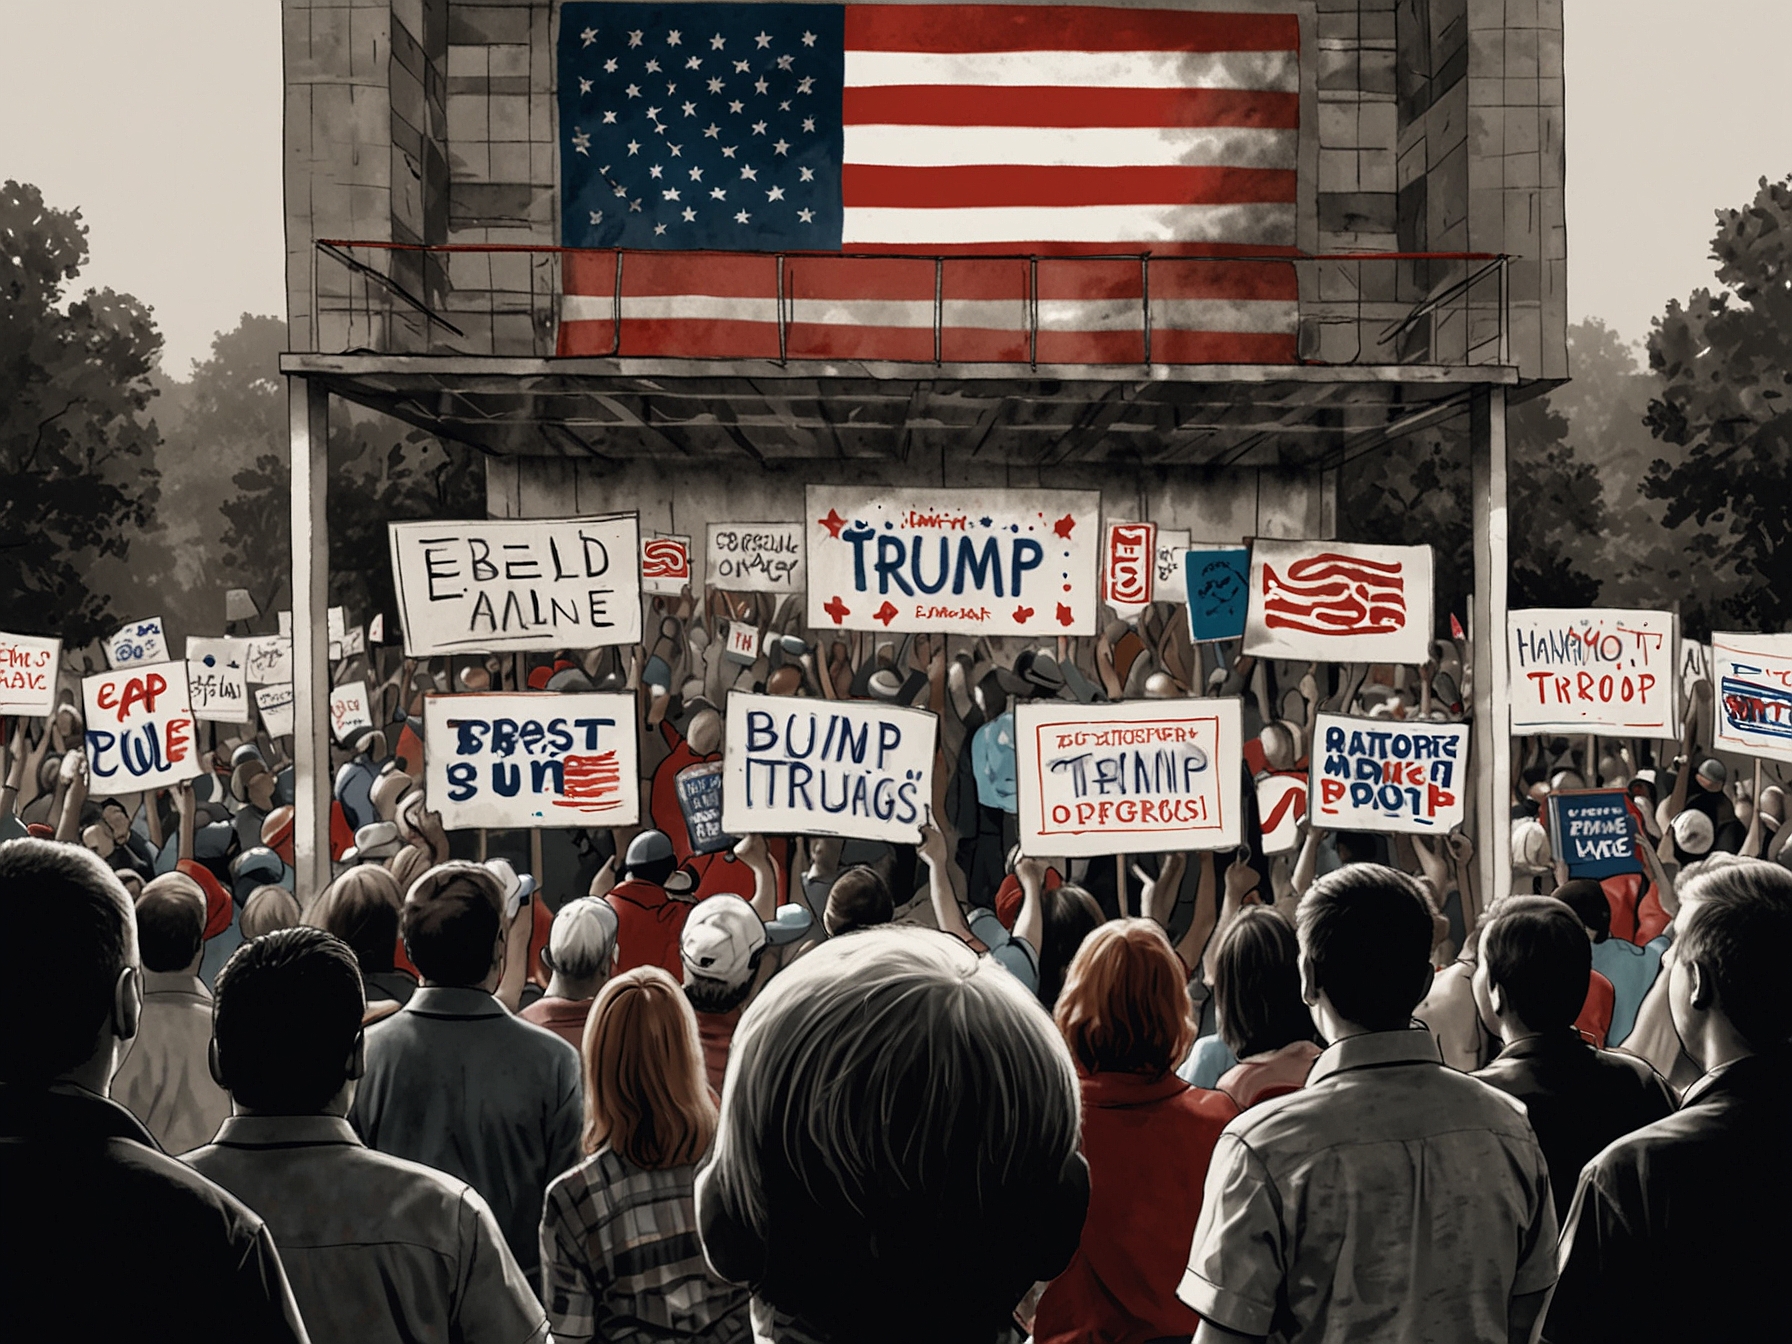 A political rally in Georgia with Trump supporters holding banners and flags. In the backdrop, a billboard displays recent poll data showing Trump's lead over Biden.